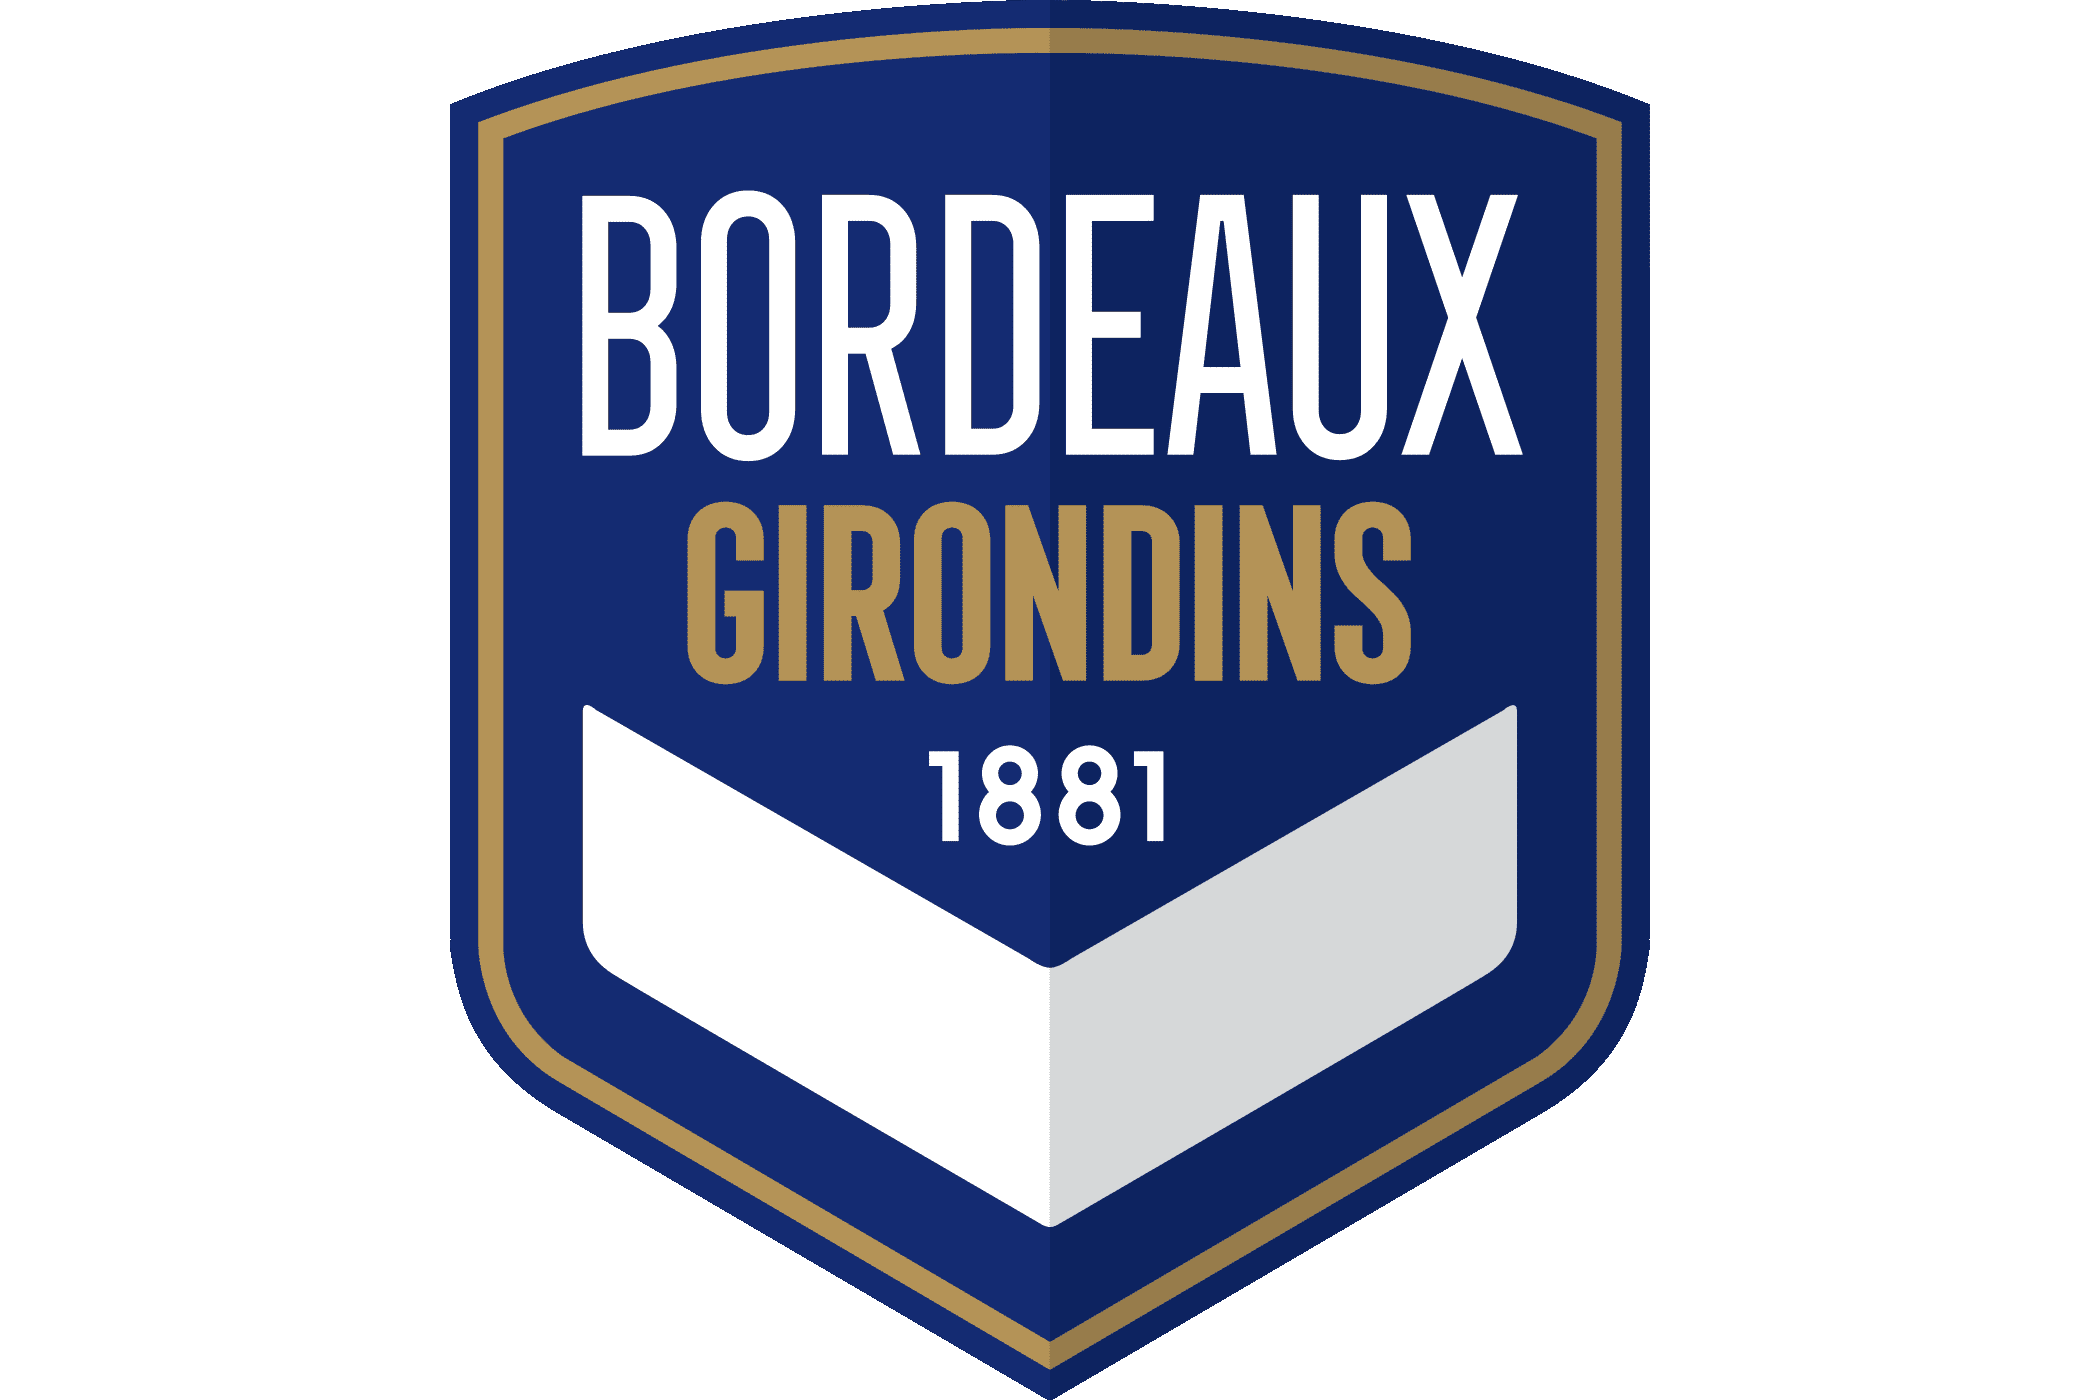 Girondins Bordeaux Returns to Popular Old Logo - First Decision